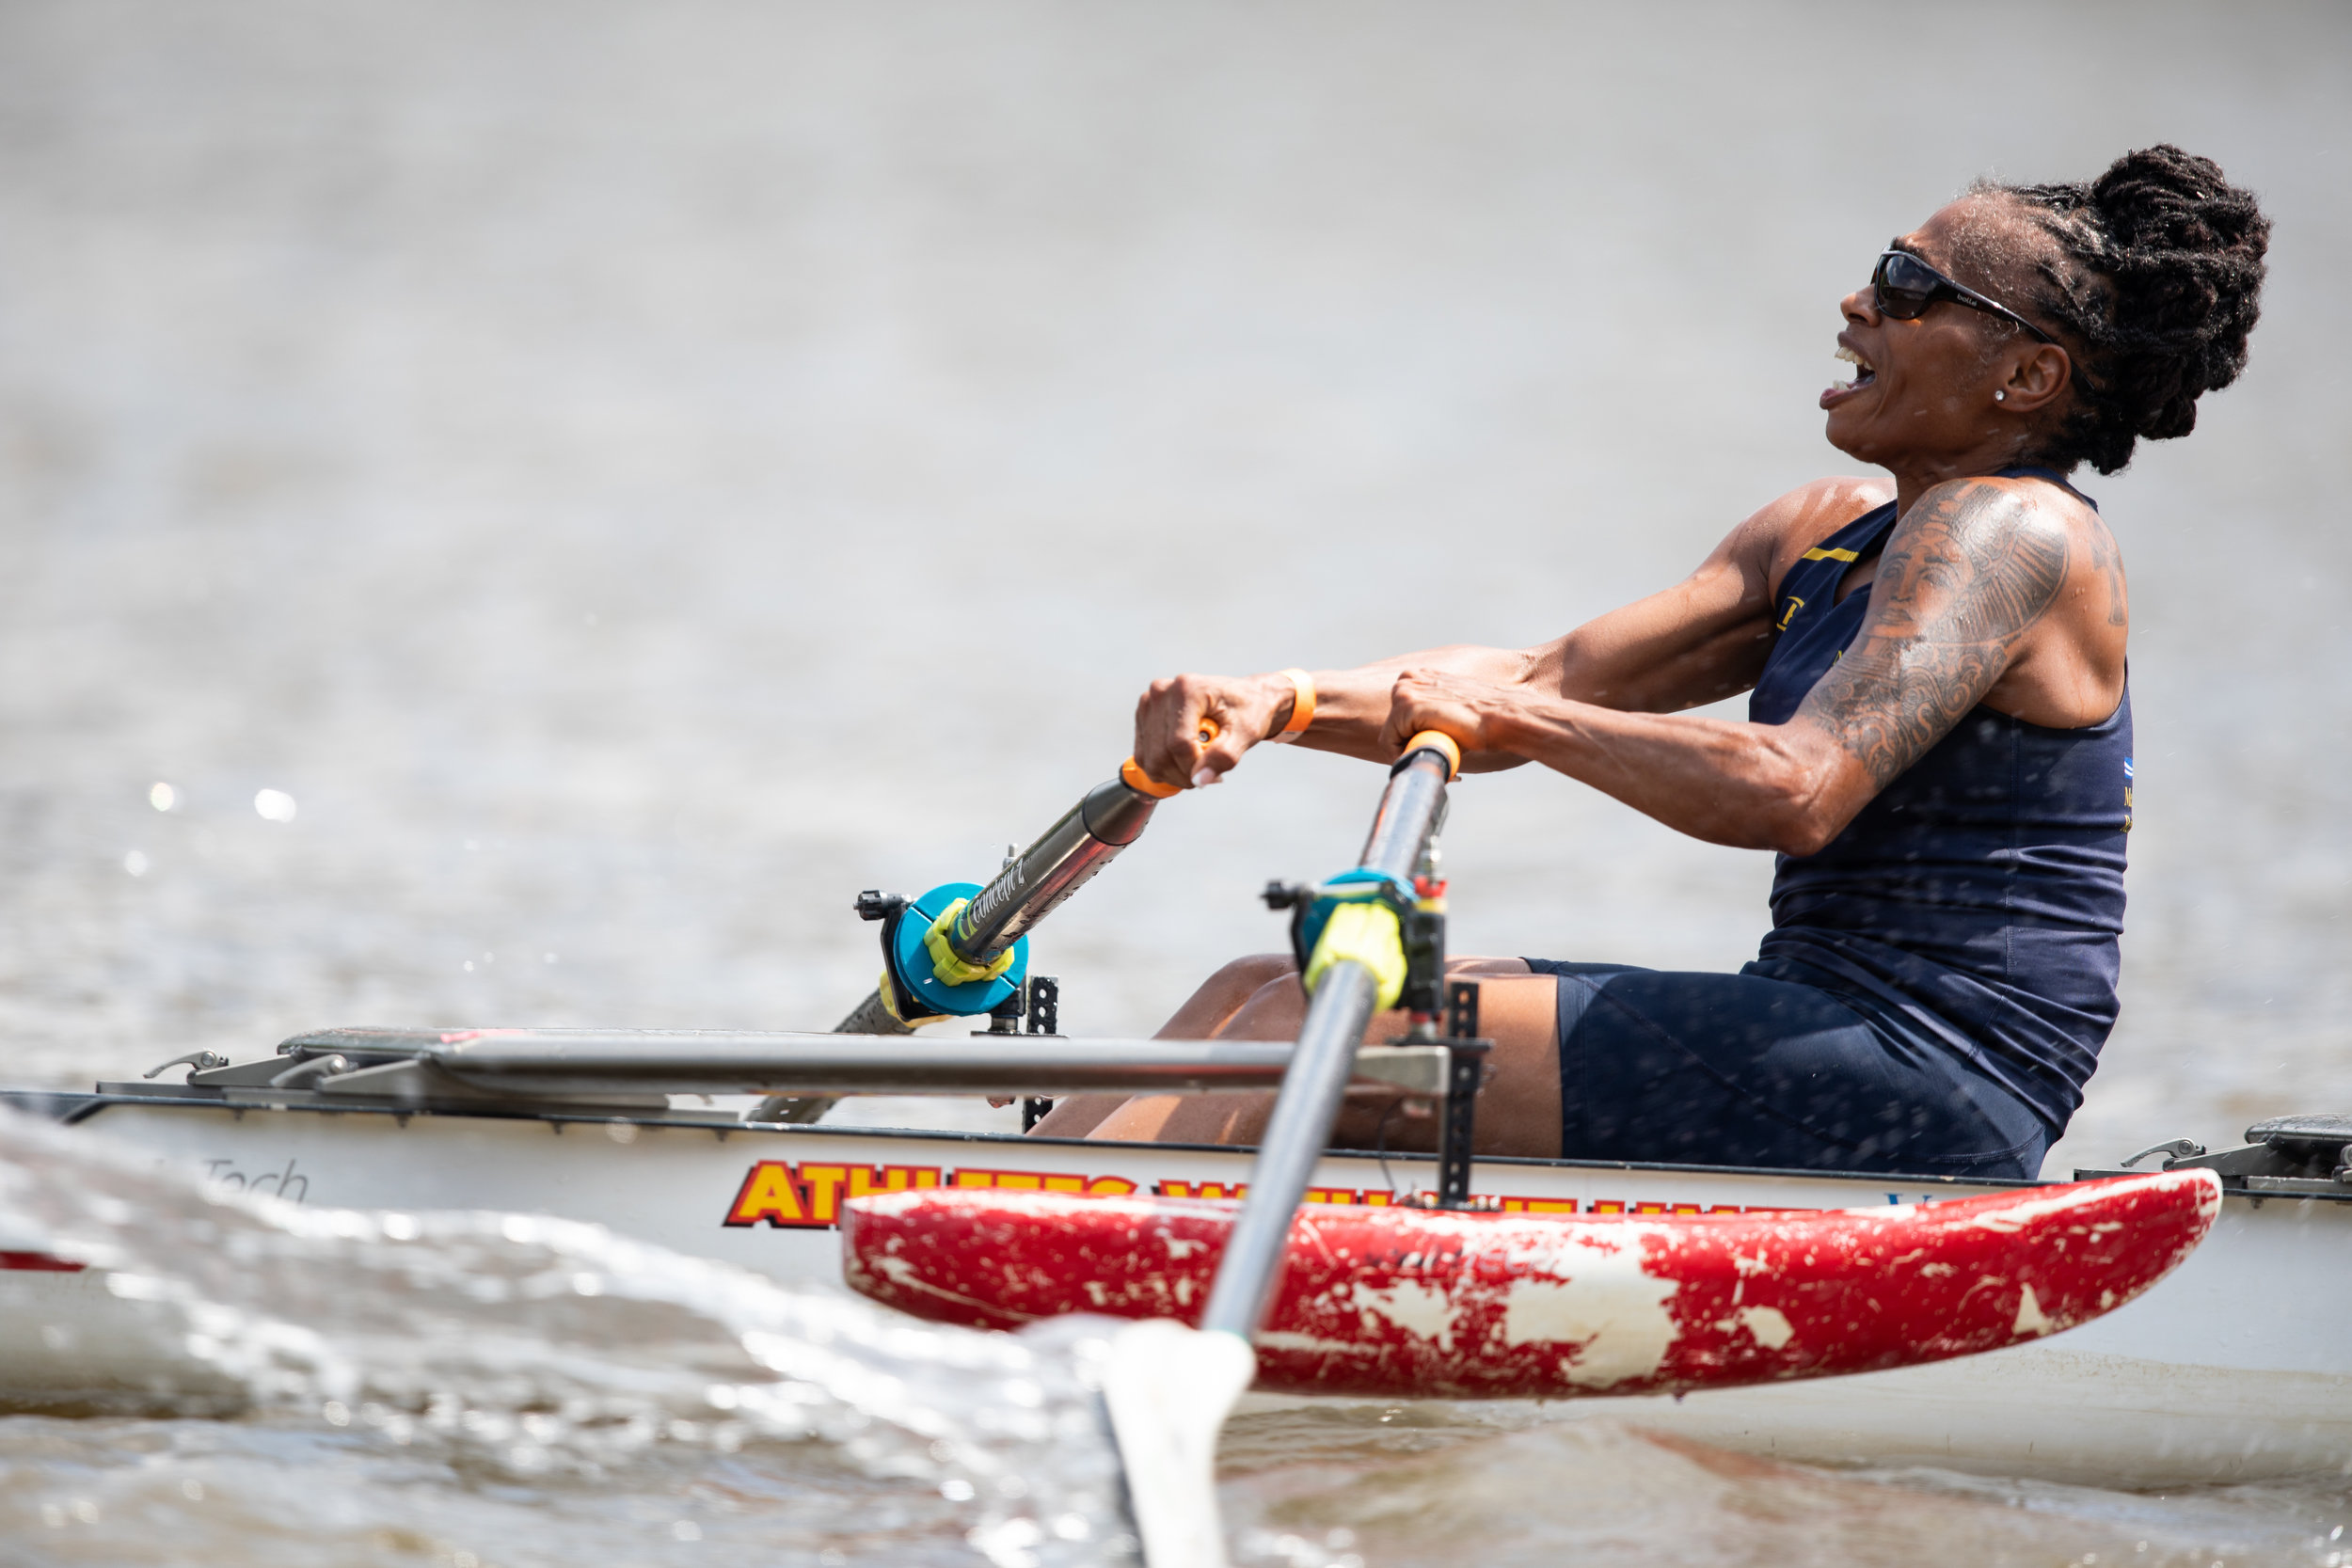   A rower races in BAYADA Home Health Care’s annual regatta in Philadelphia, Pa. on Aug. 23, 2018.  